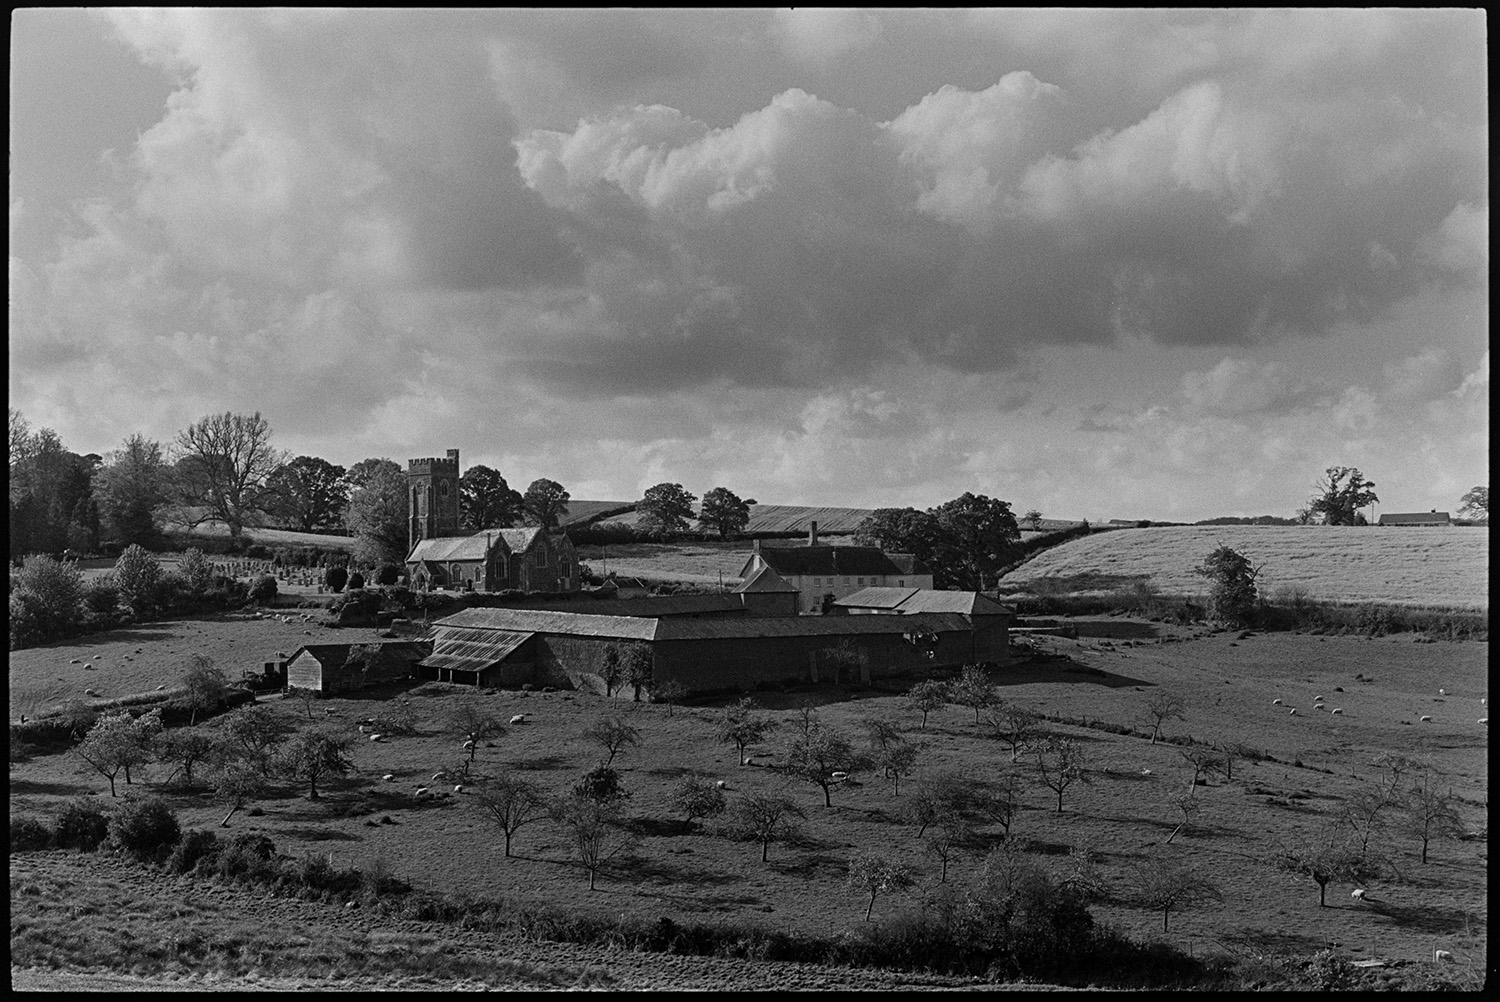 Orchards, farm orchard.
[Apple orchard and fields at The Barton, Shobrooke, near Crediton. There are sheep in the orchard and adjoining field. There is a large range of farm buildings with the Barton farmhouse and Shobrooke Church in the background, and stormy clouds above.]